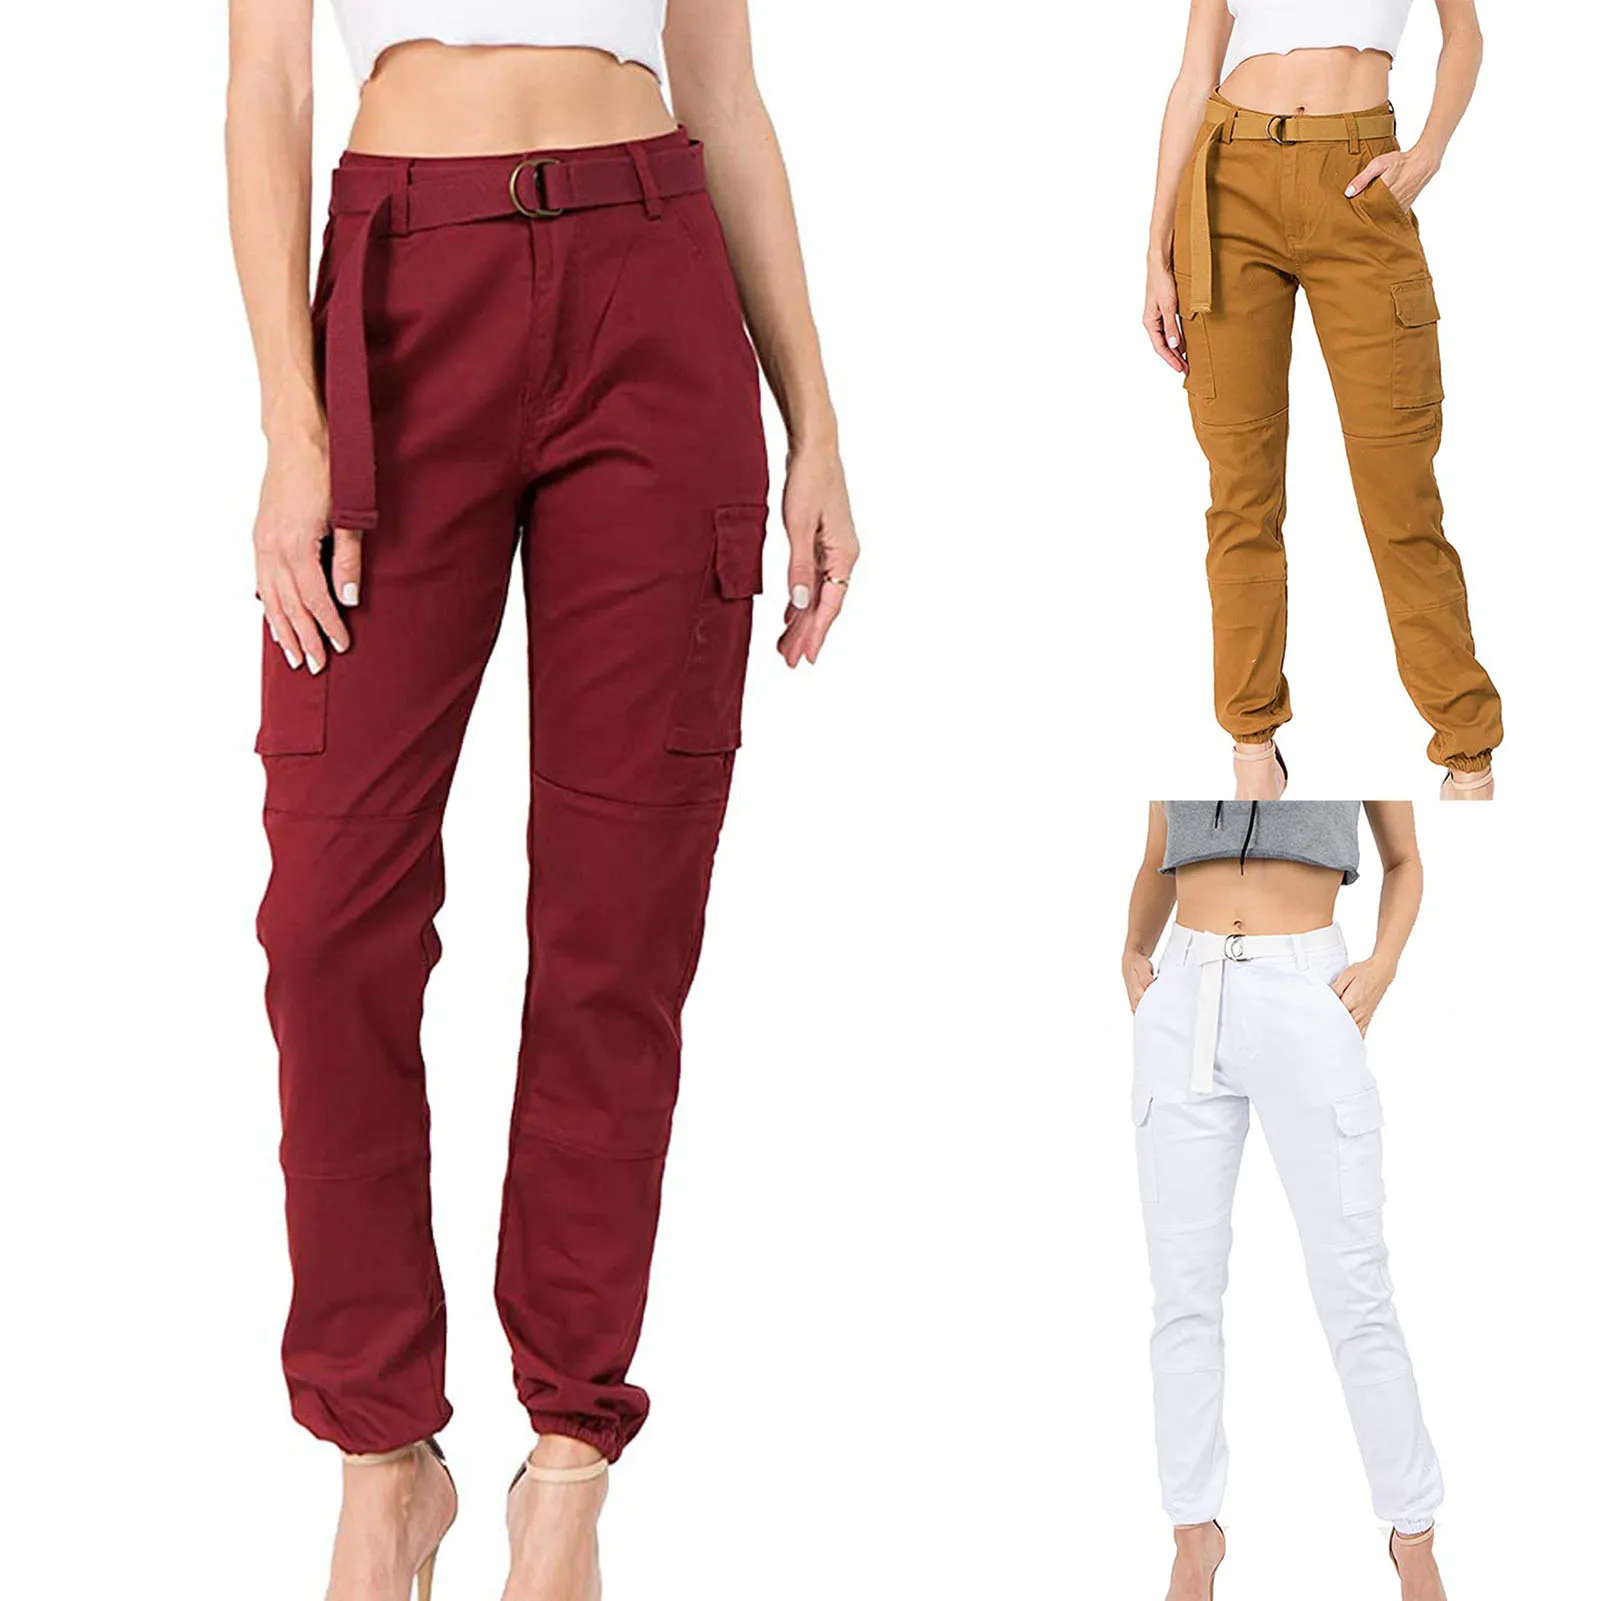 Women's Casual Work Pants with Pockets and Belt Long Pants for Summer Elastic Waist Jogging Pants With Accessories SEC88